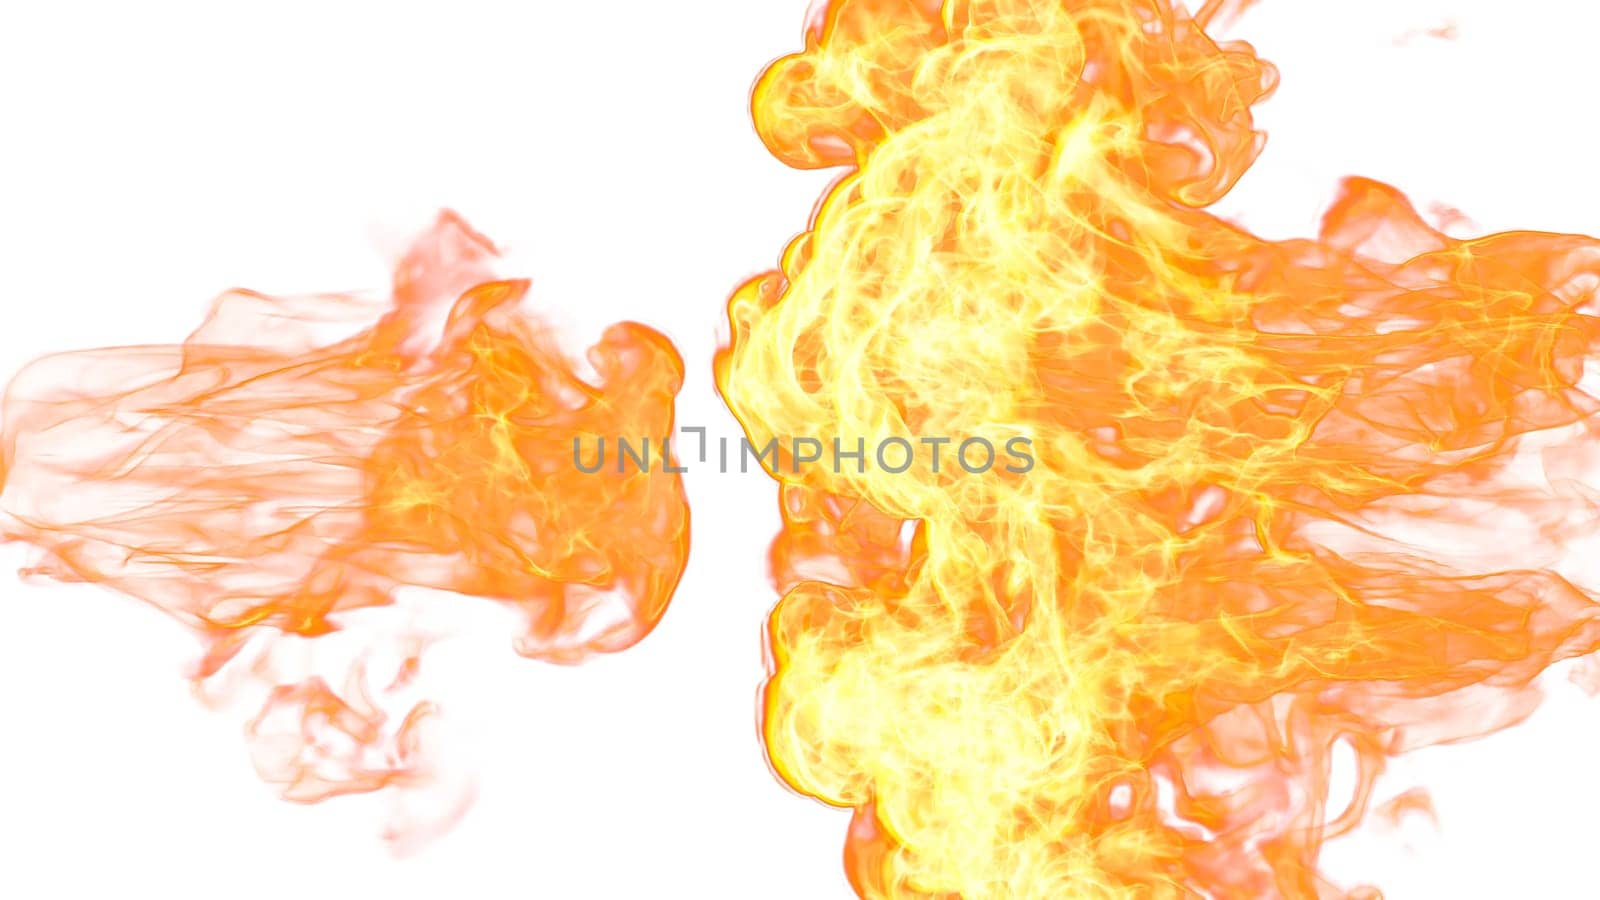 3d illustration. Tongues of flame from two sides on a white background. by mrwed54